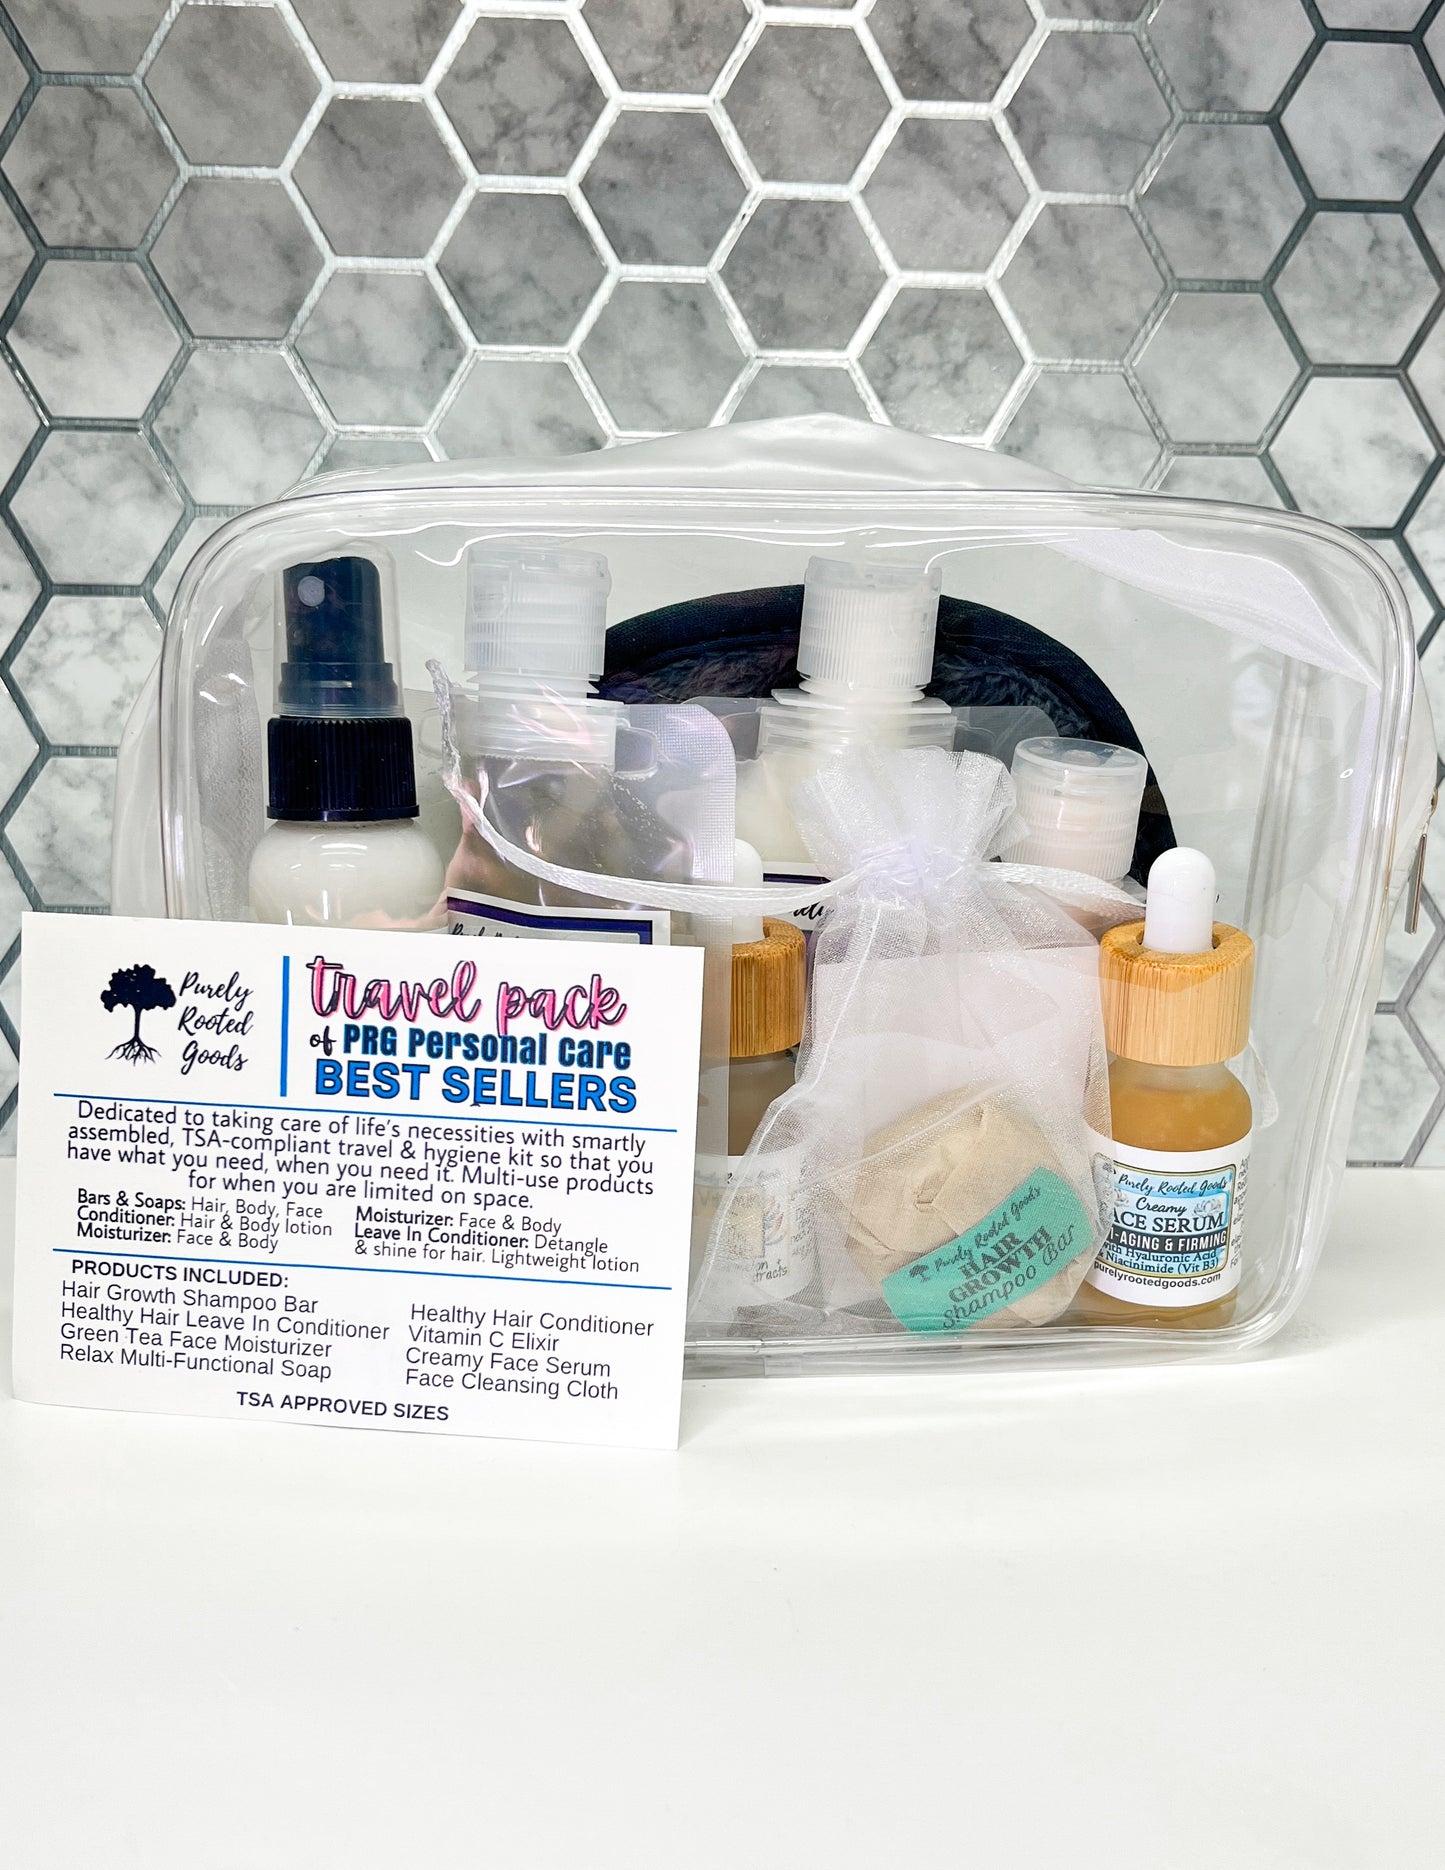 Travel Pack of PRG Personal Care Best Sellers